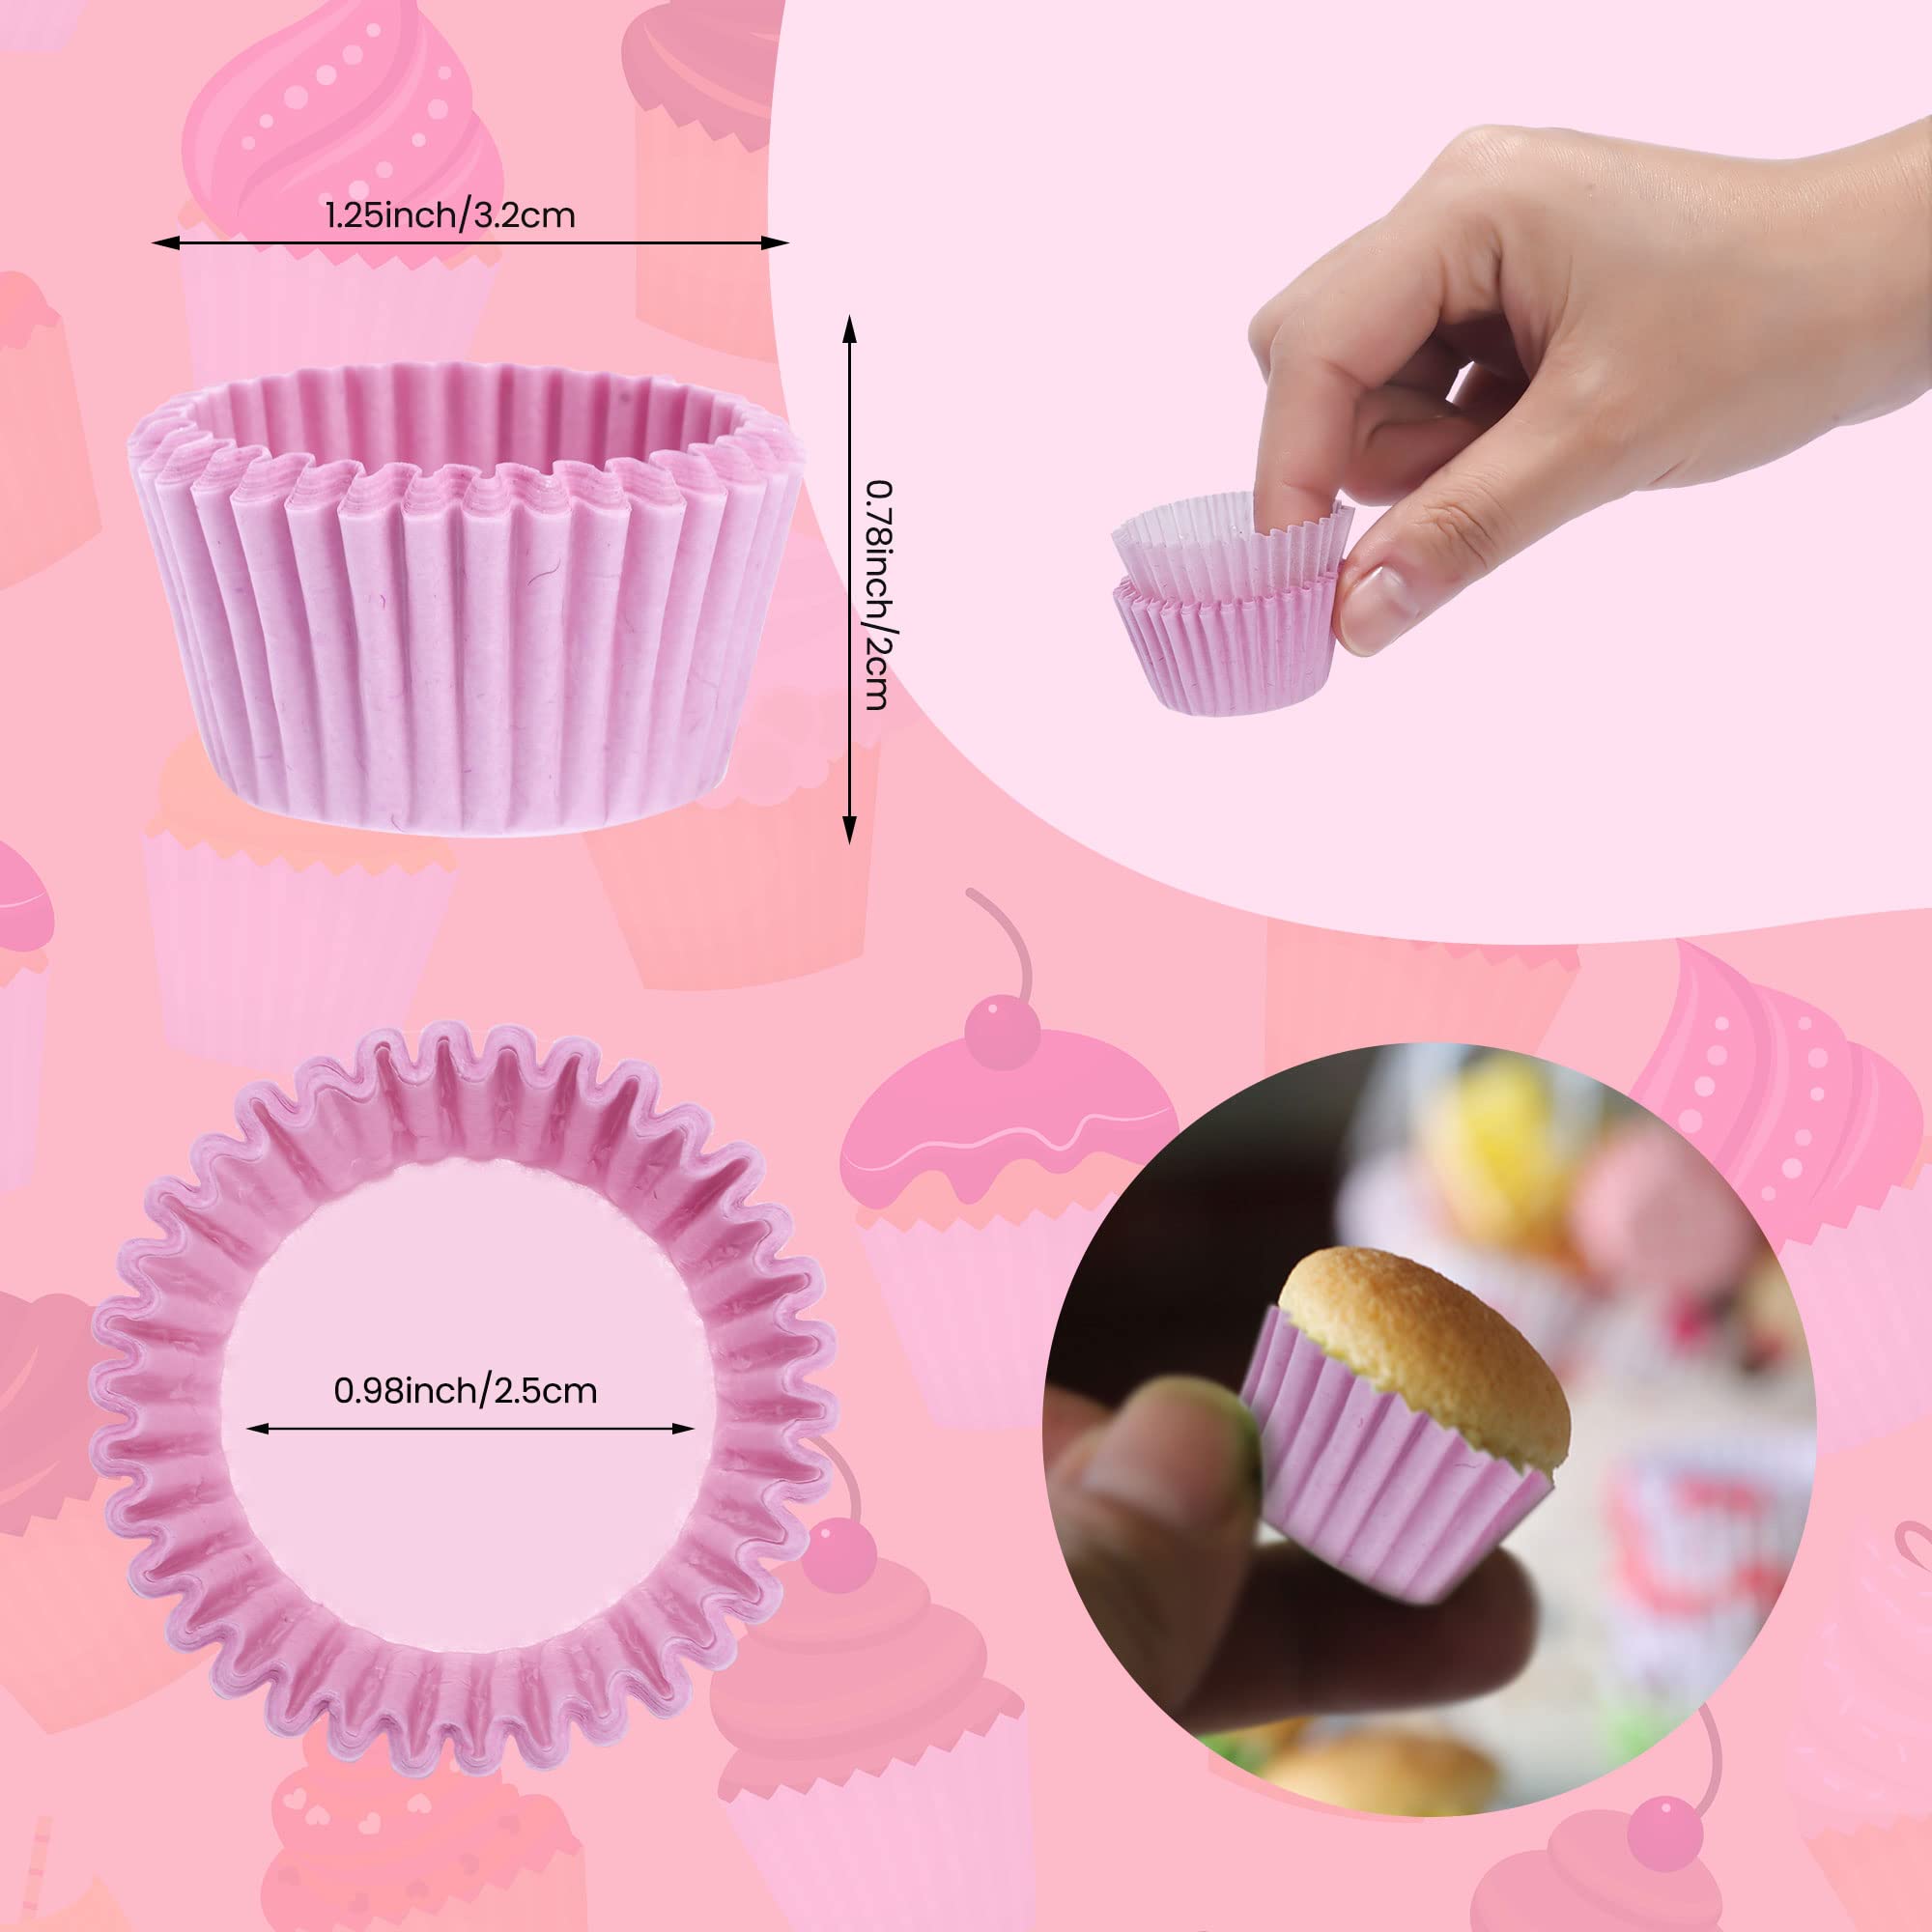 NUOMI 1 Inch Super Mini Cupcake papers Liners Baking Cups 1000 Pack Muffin Lining Wrappers, Pink